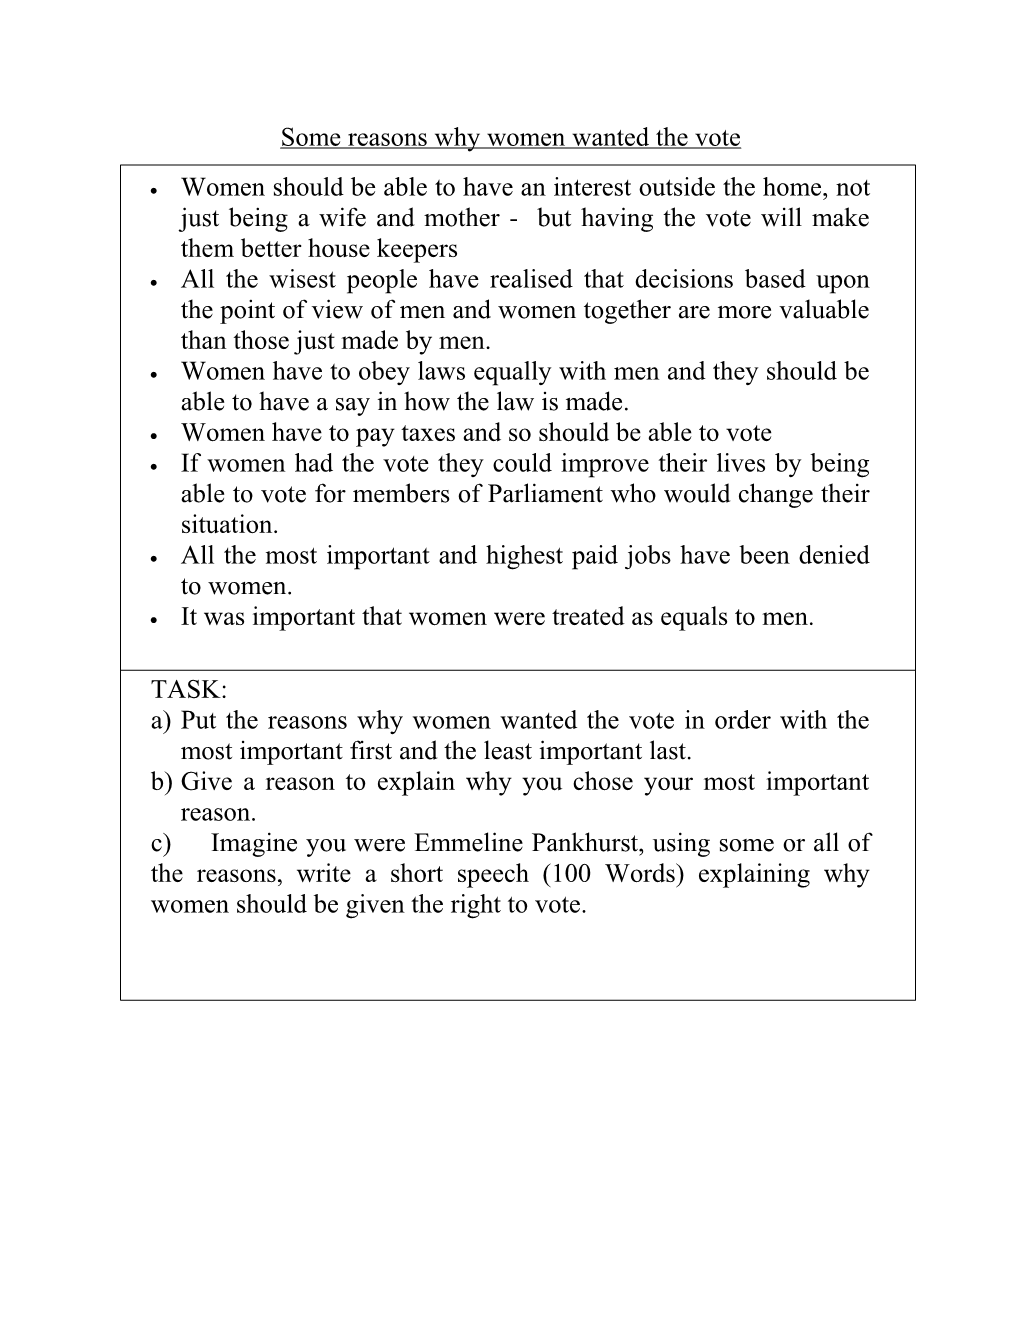 Some Reasons Why Women Wanted The Vote